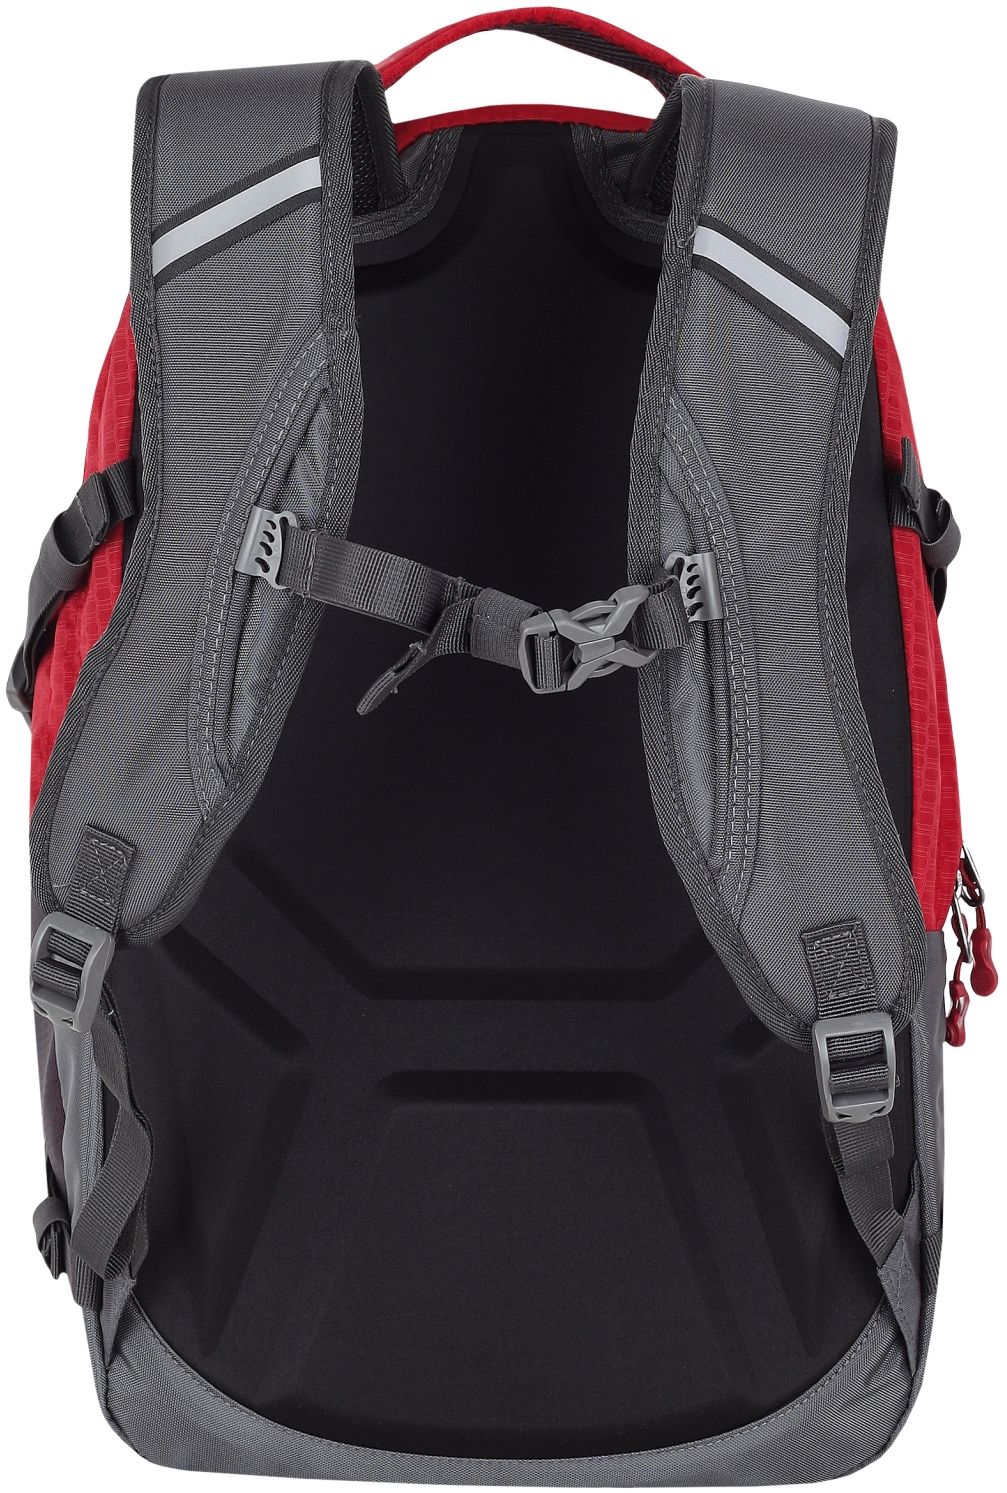 Allround city backpack